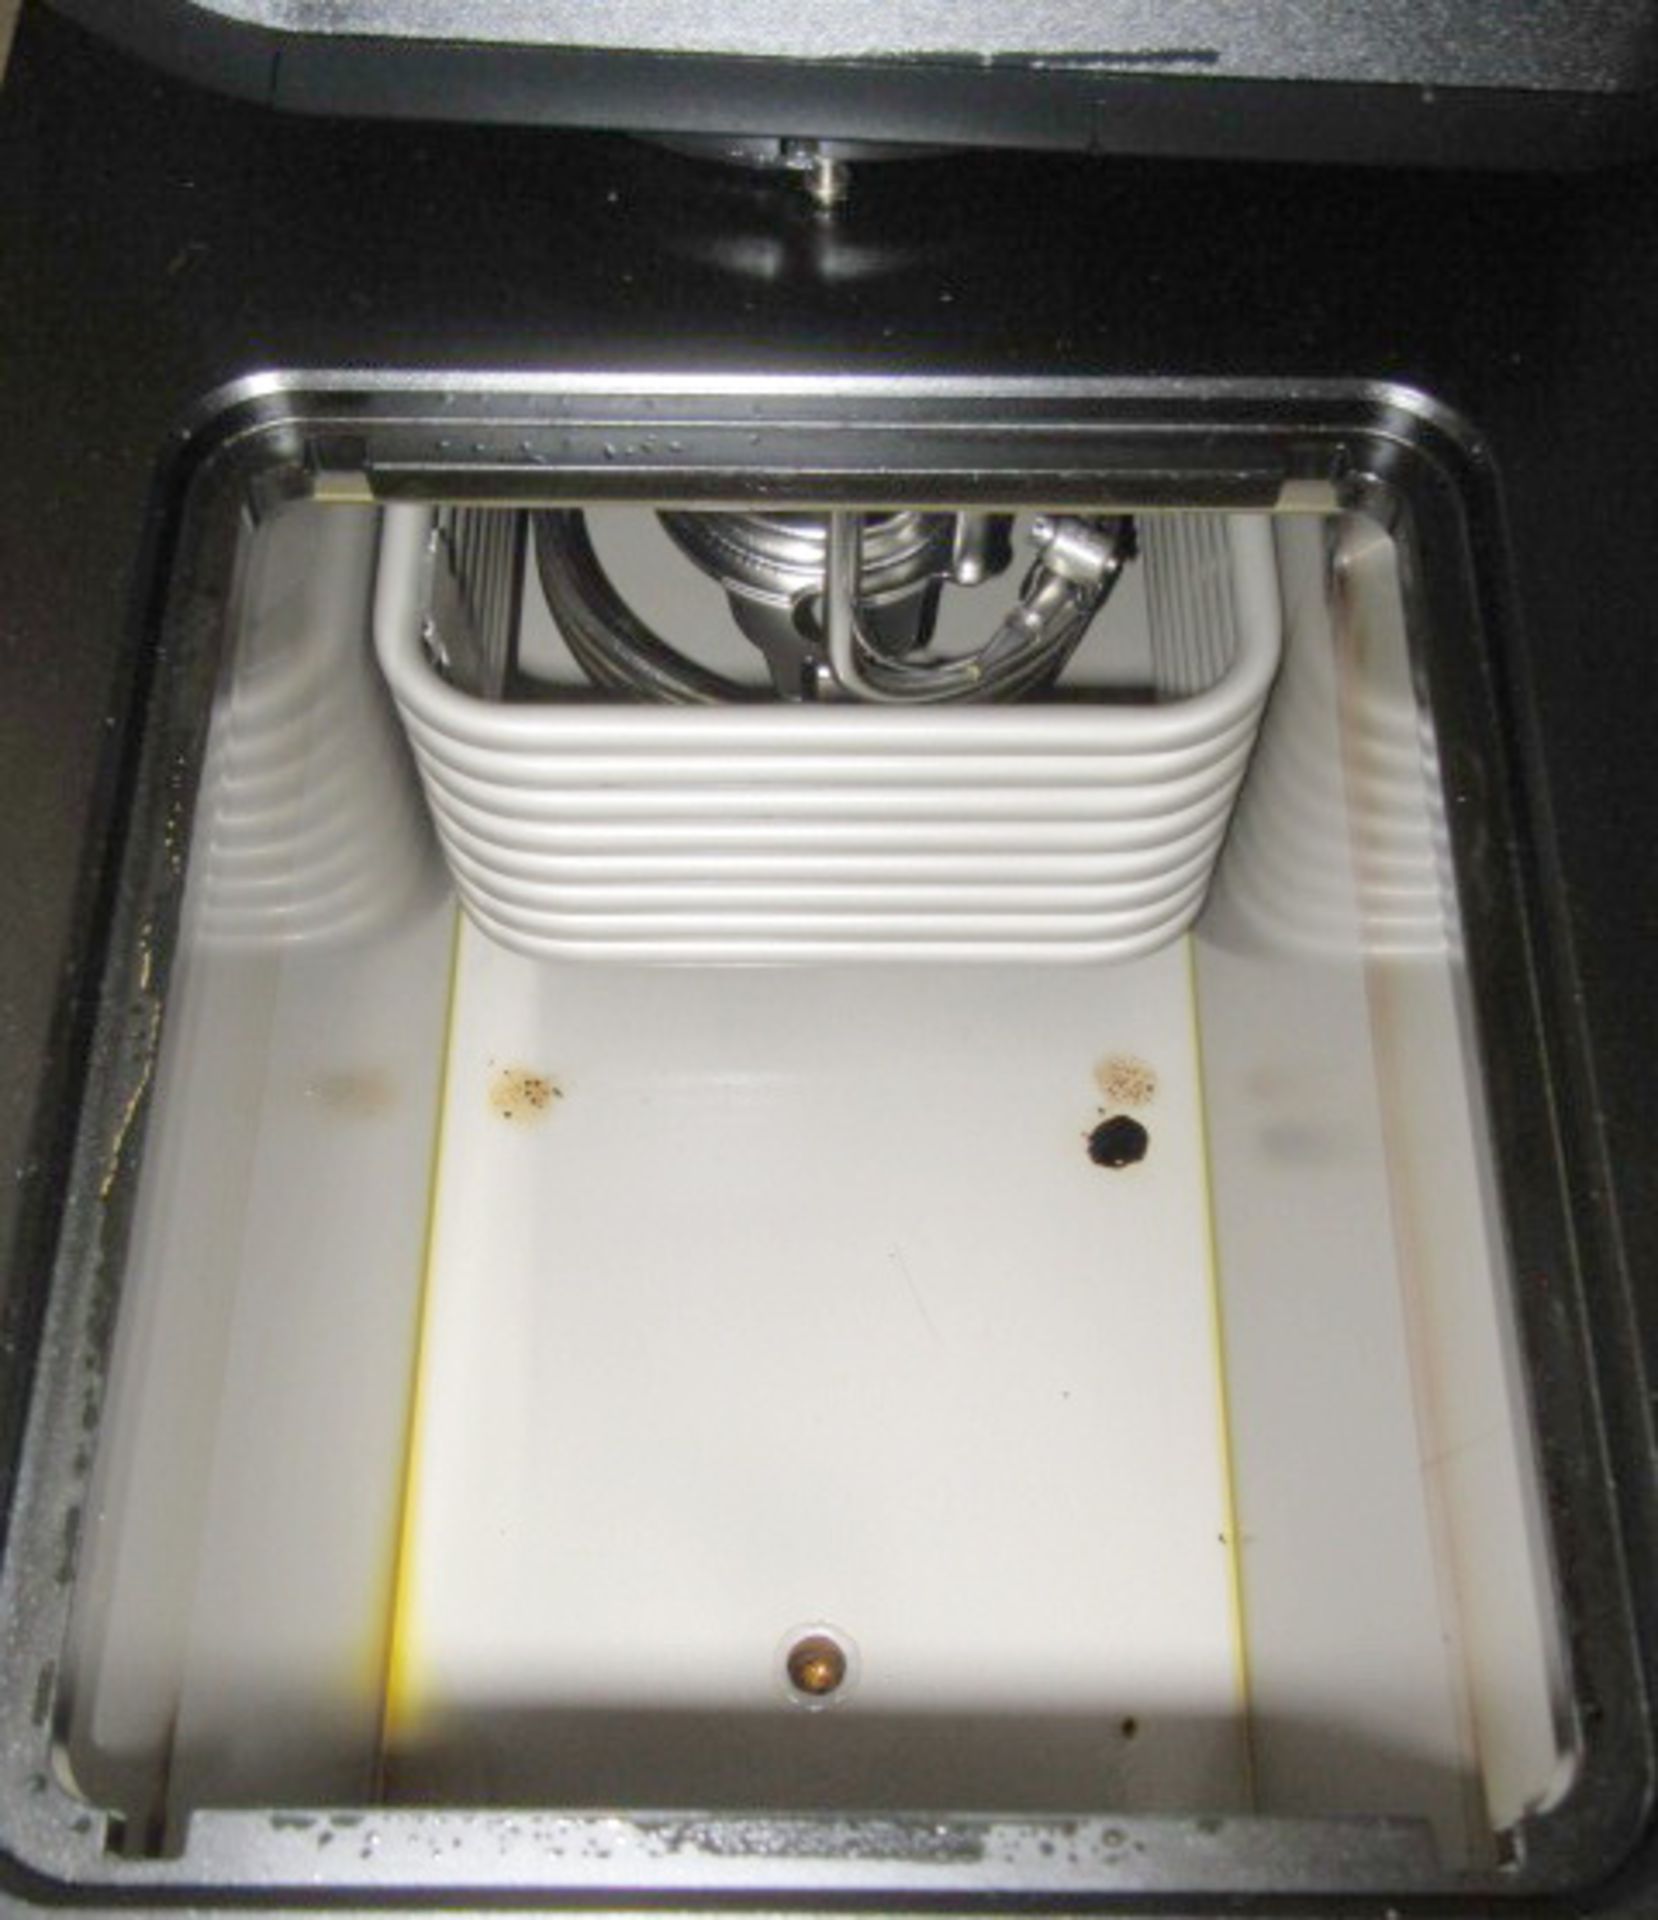 PolyScience Refrigerated Bath - Image 6 of 7